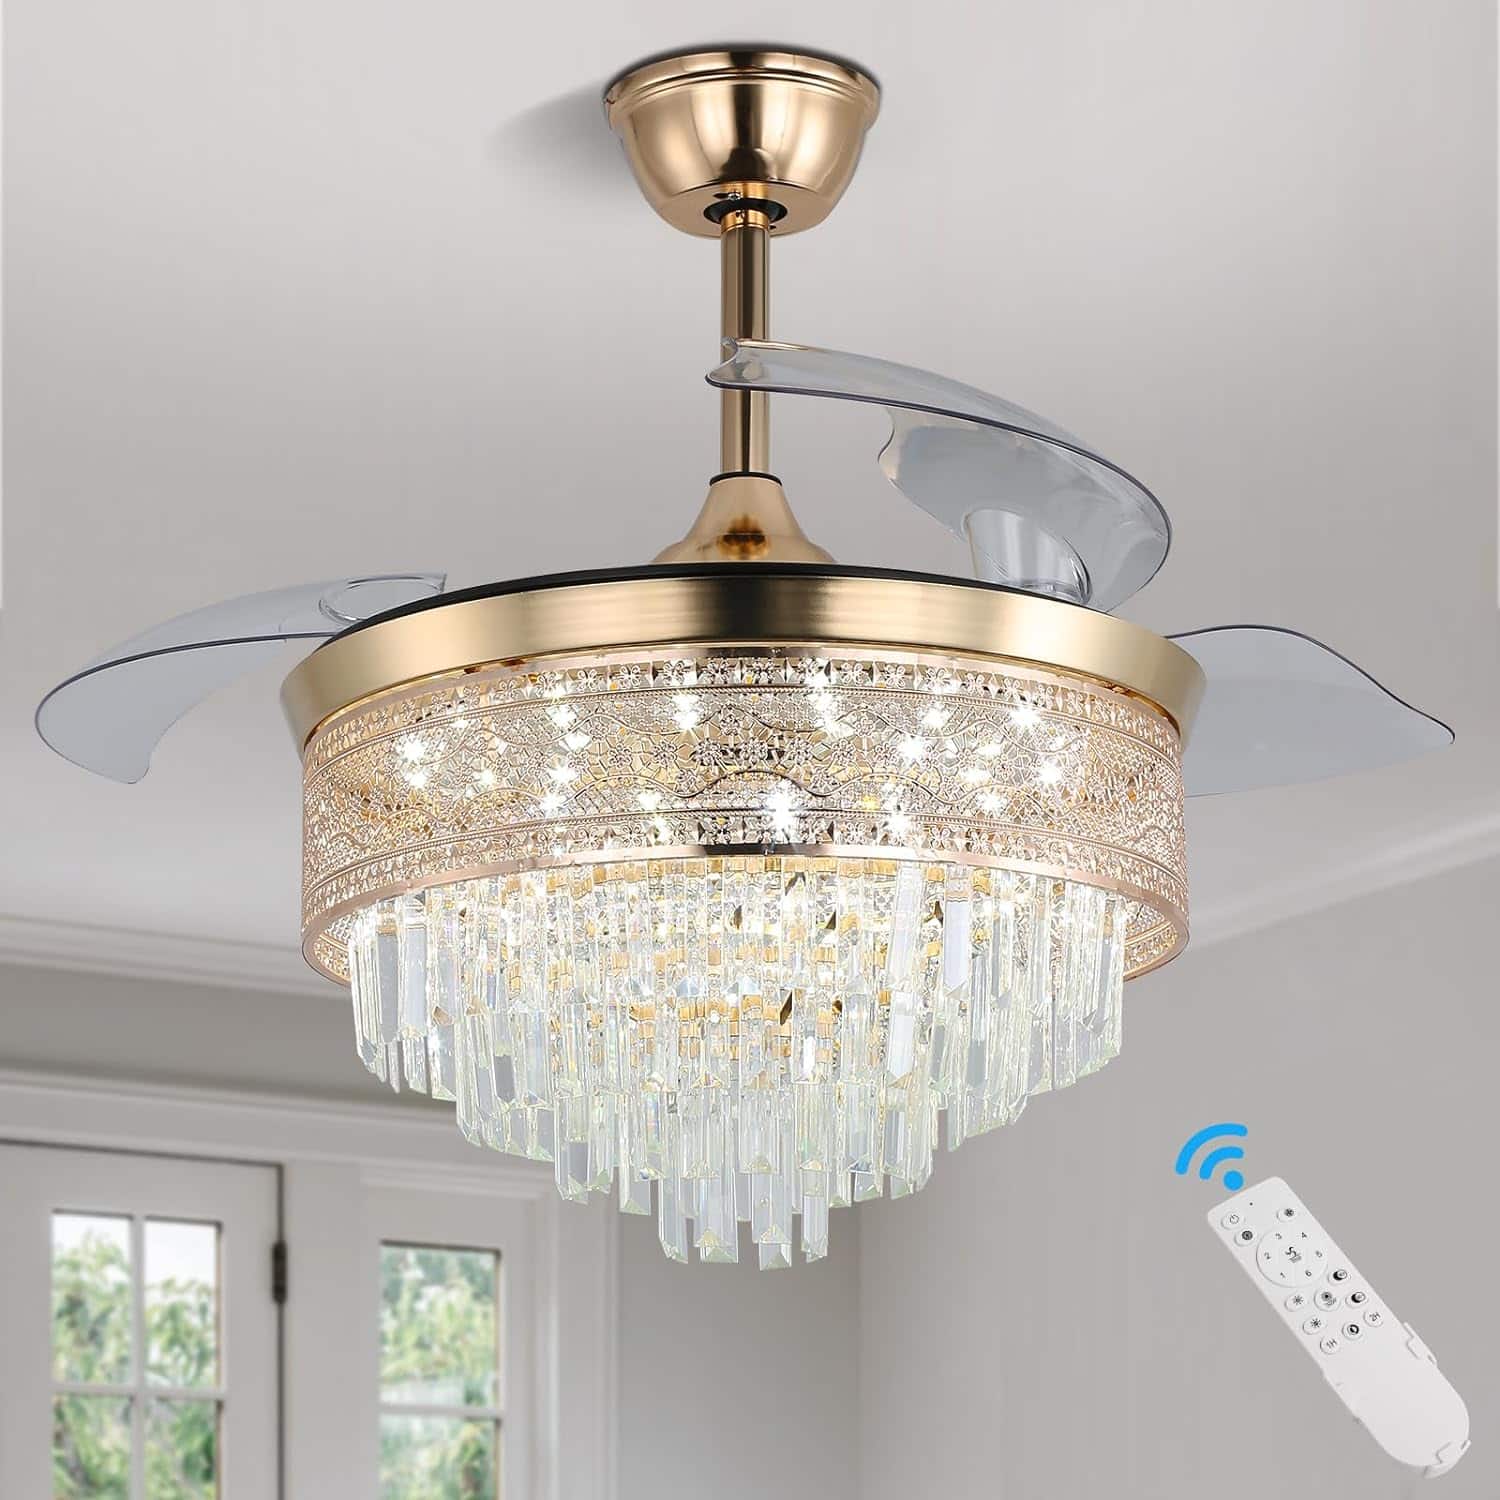 Ceiling Fans with Lights 42 Dimmable Retractable Fandelier Chandelier Fan Modern Crystal Ceiling Fans with Lights and Remote for Bedroom Living Room Invisible Blades 6 Speeds, Gold